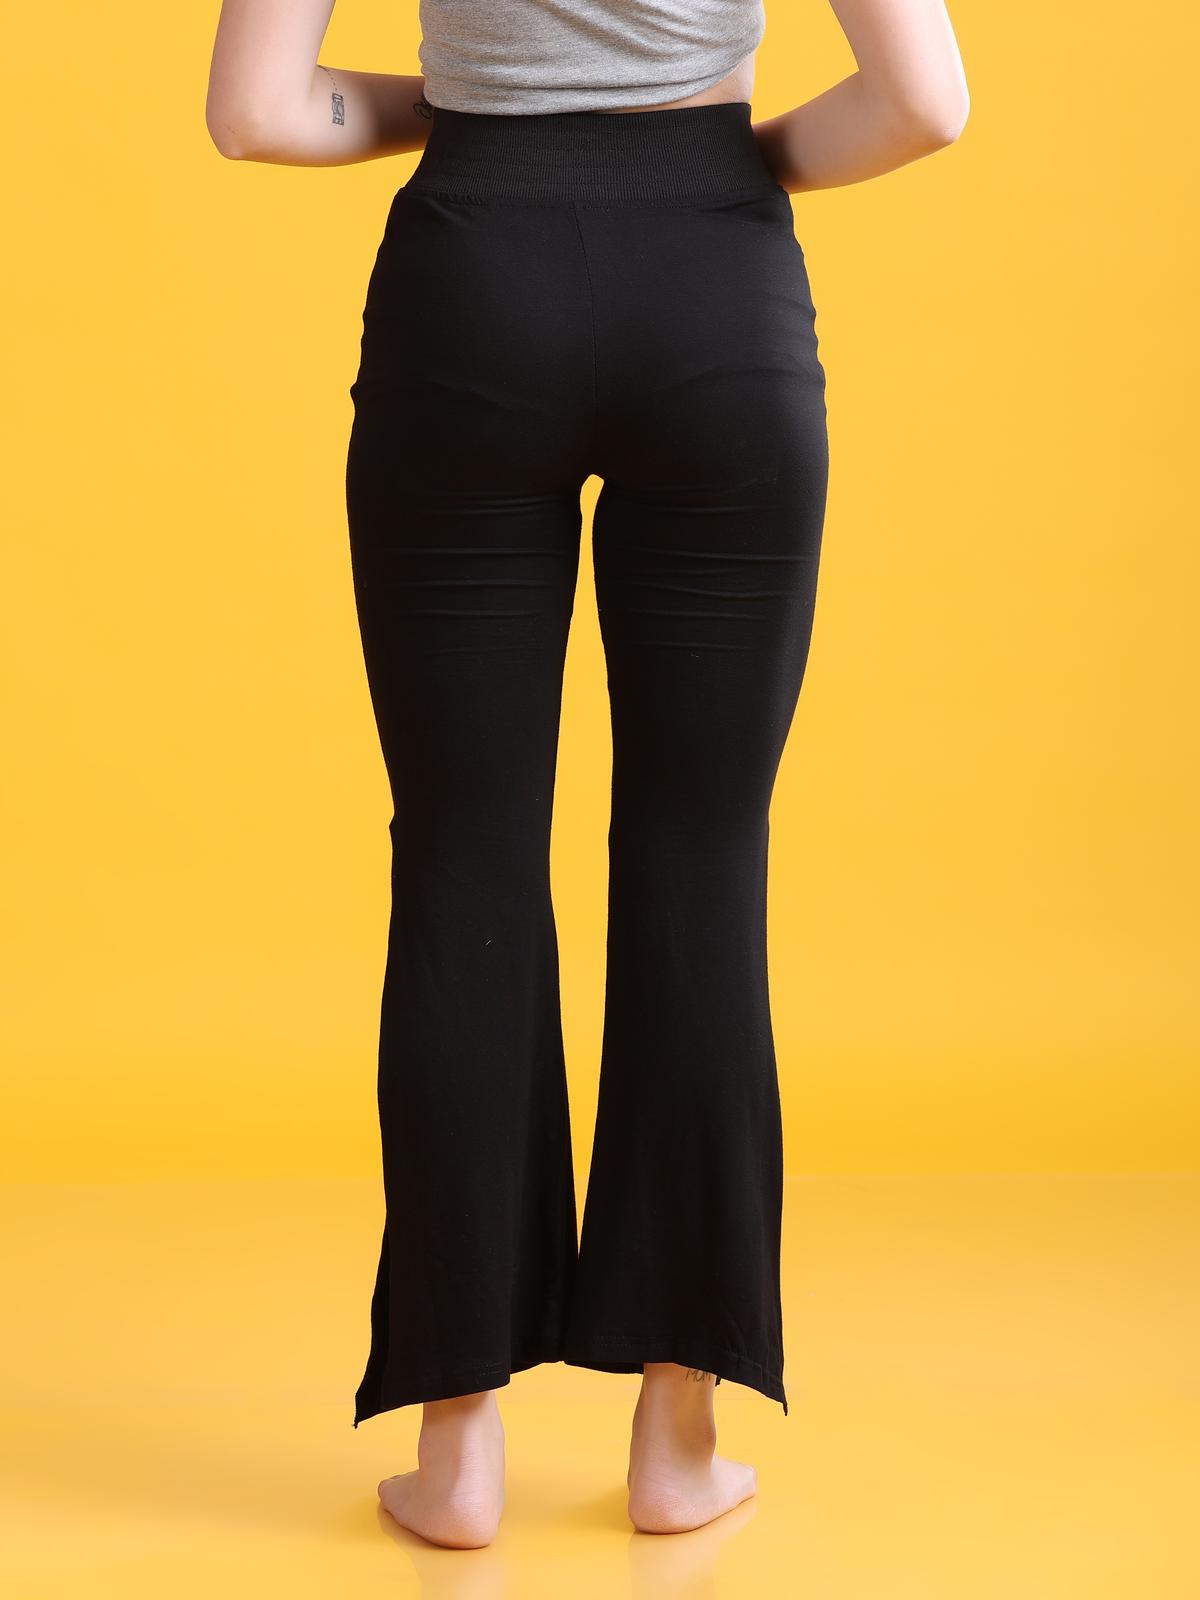 Women Black Cotton Side Slit Pants with Flared Bottom for Dance, Yoga, –  The Dance Bible